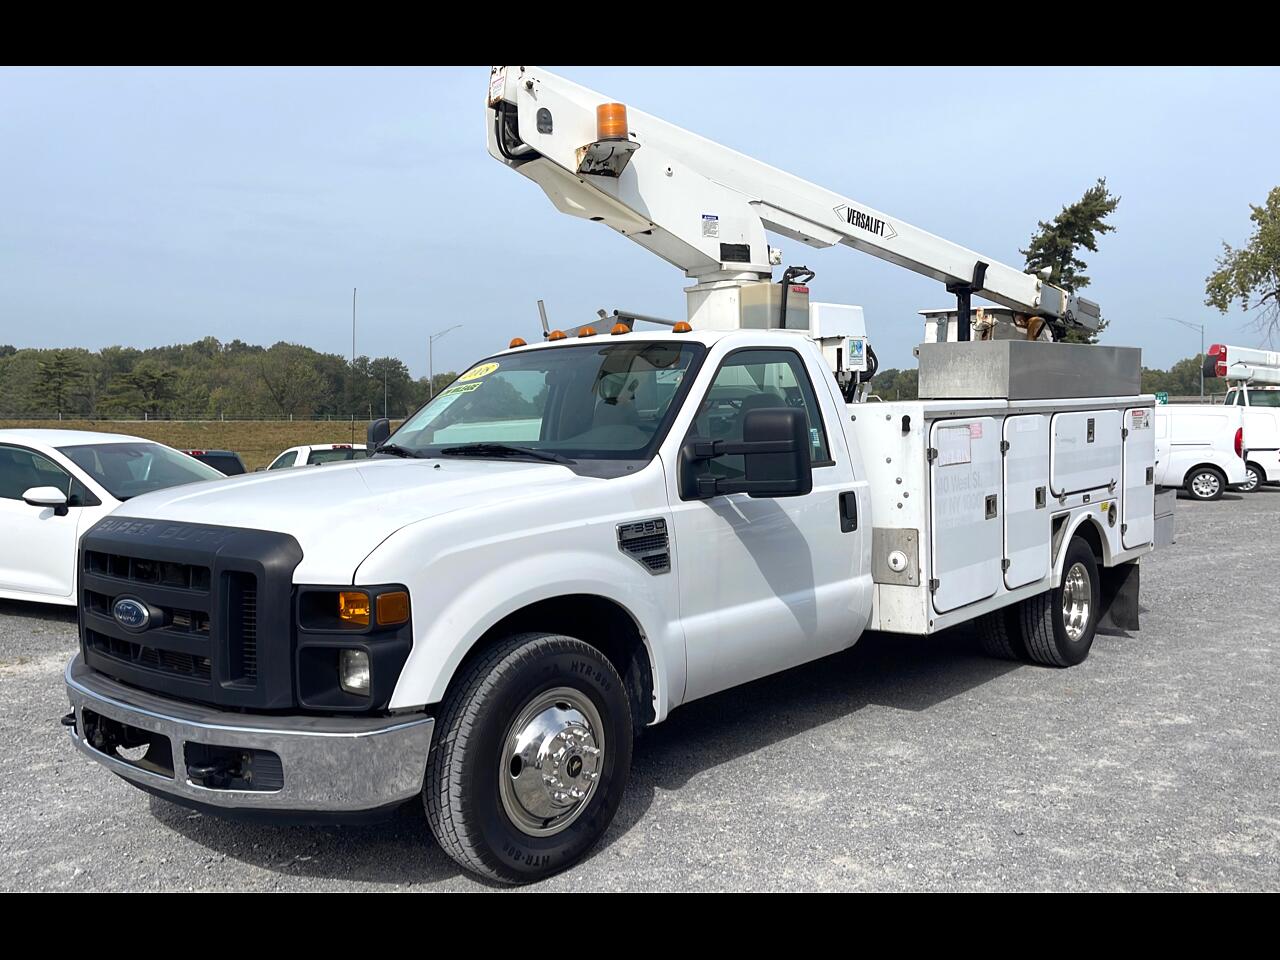 2008 Ford F-350 SD XL DRW 2WD